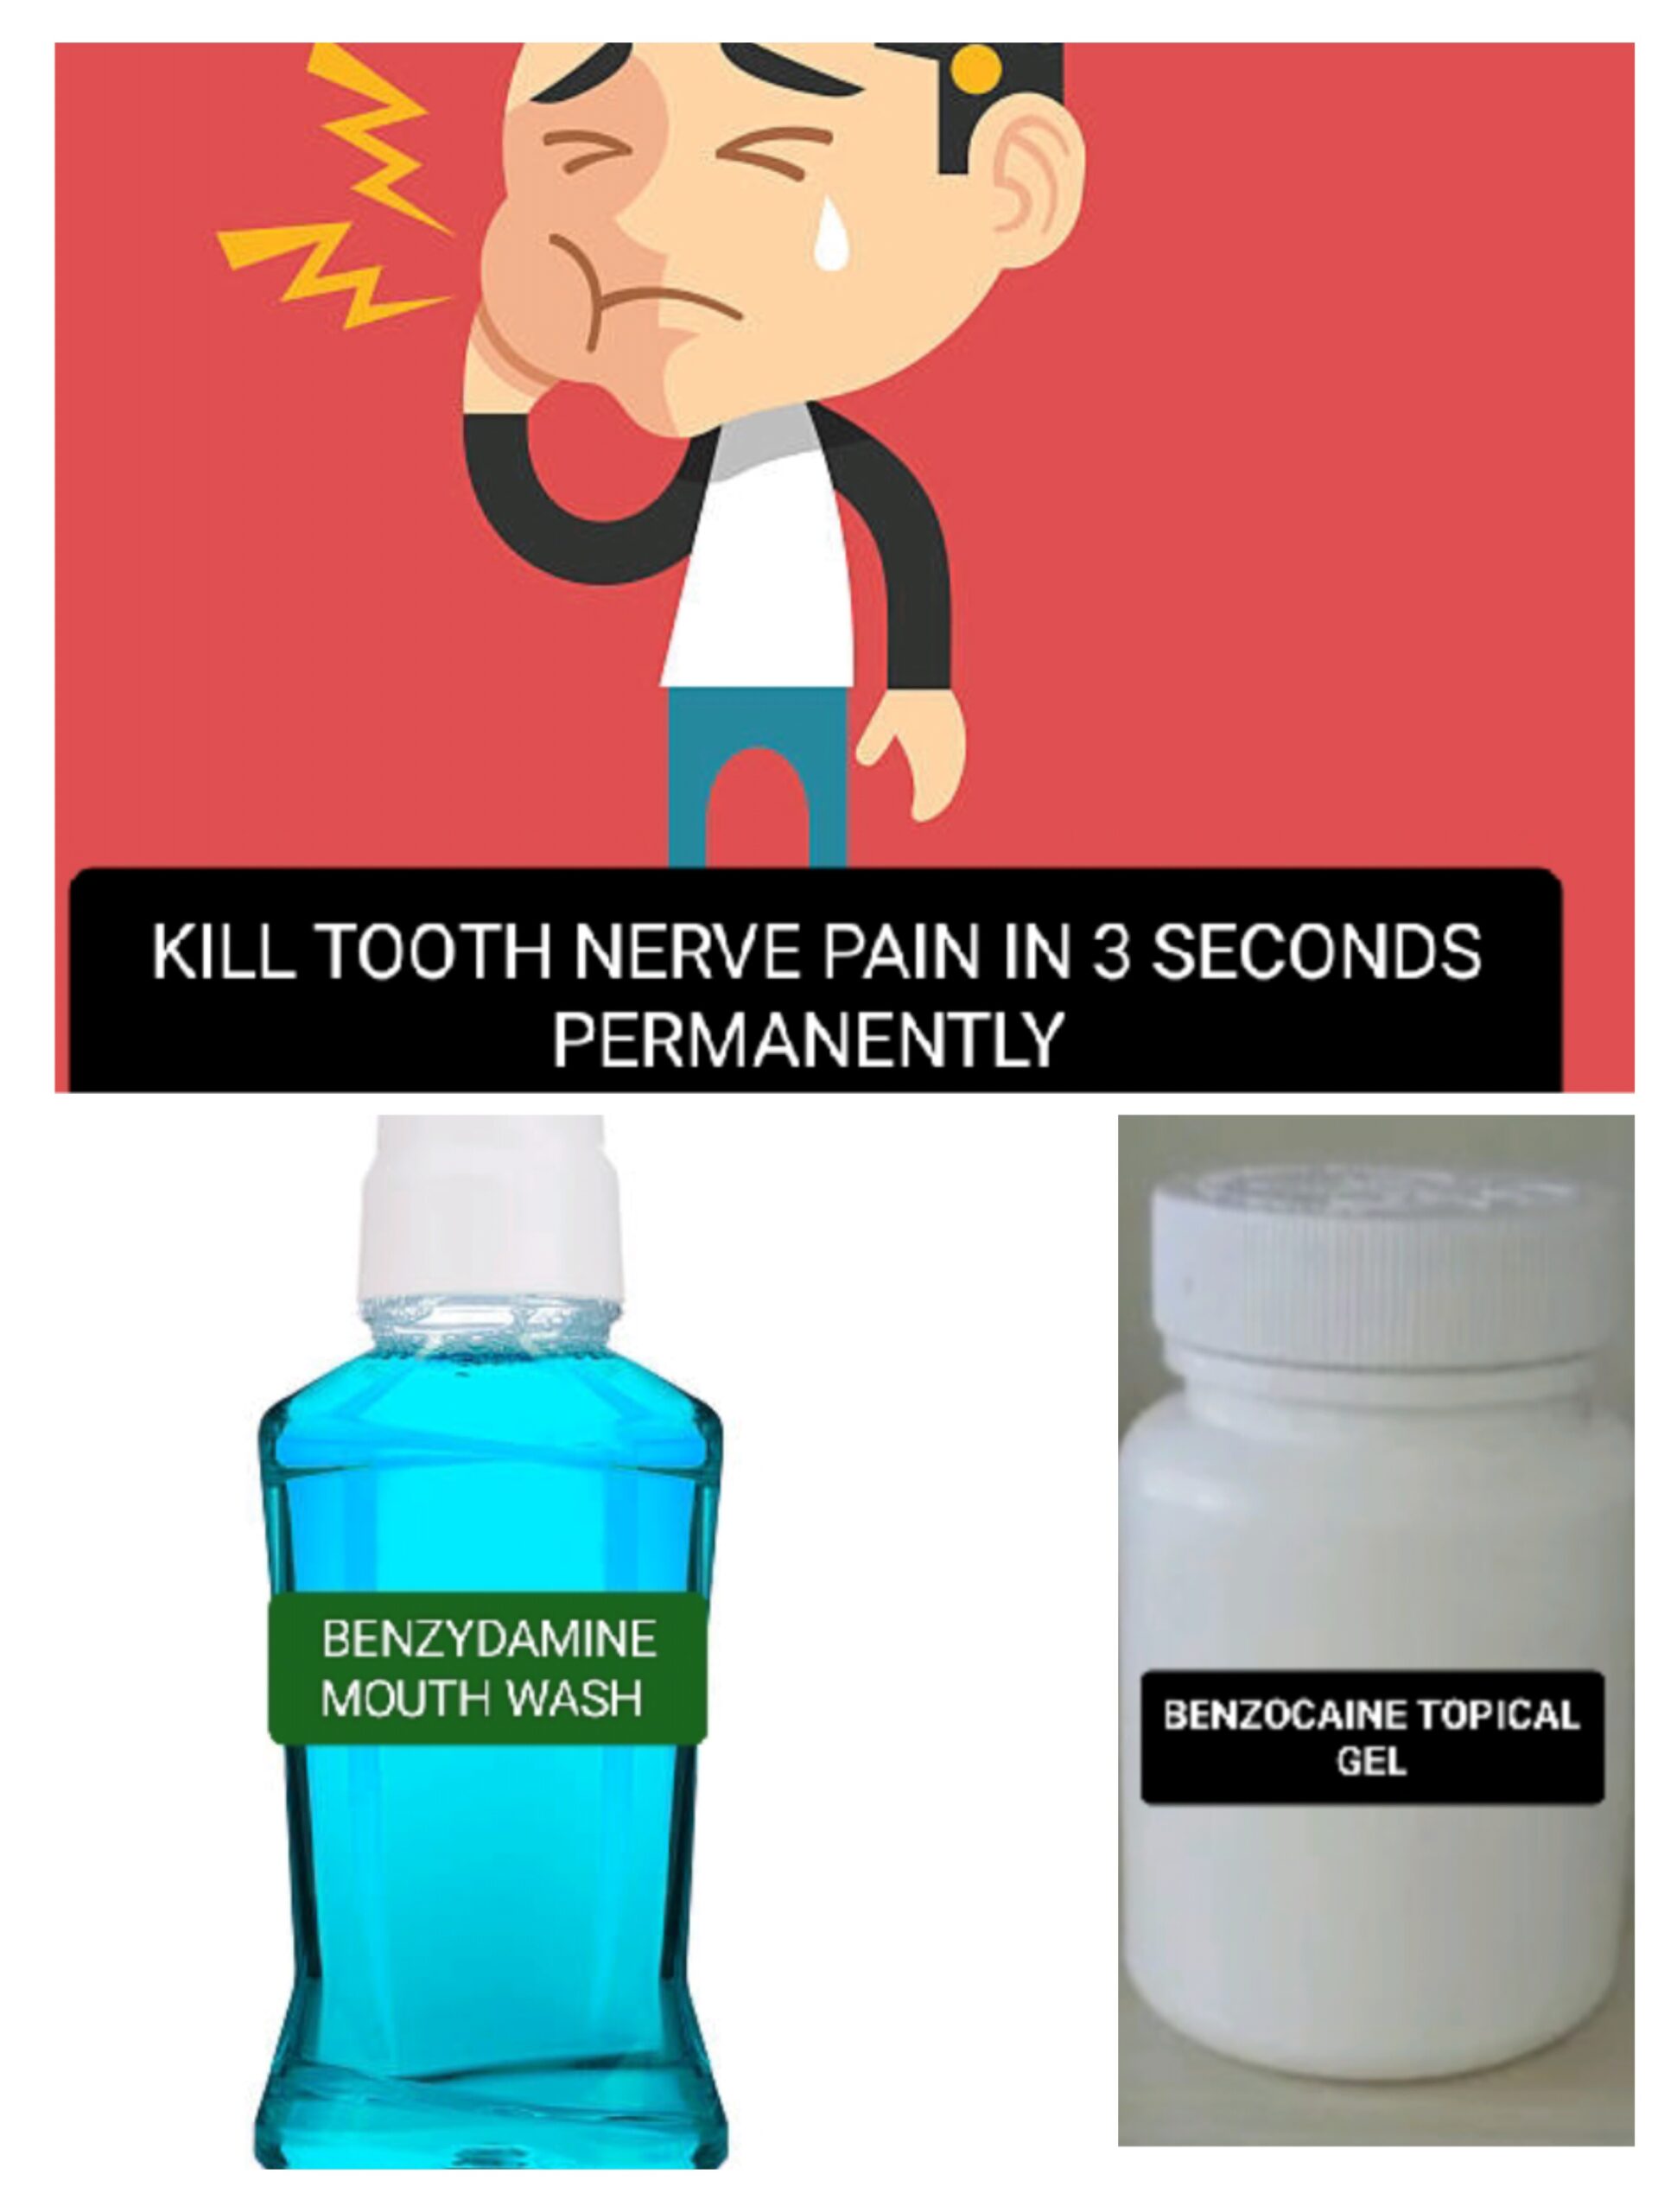 HOW TO KILL TOOTH PAIN NERVE IN 3 SECONDS PERMANENTLY